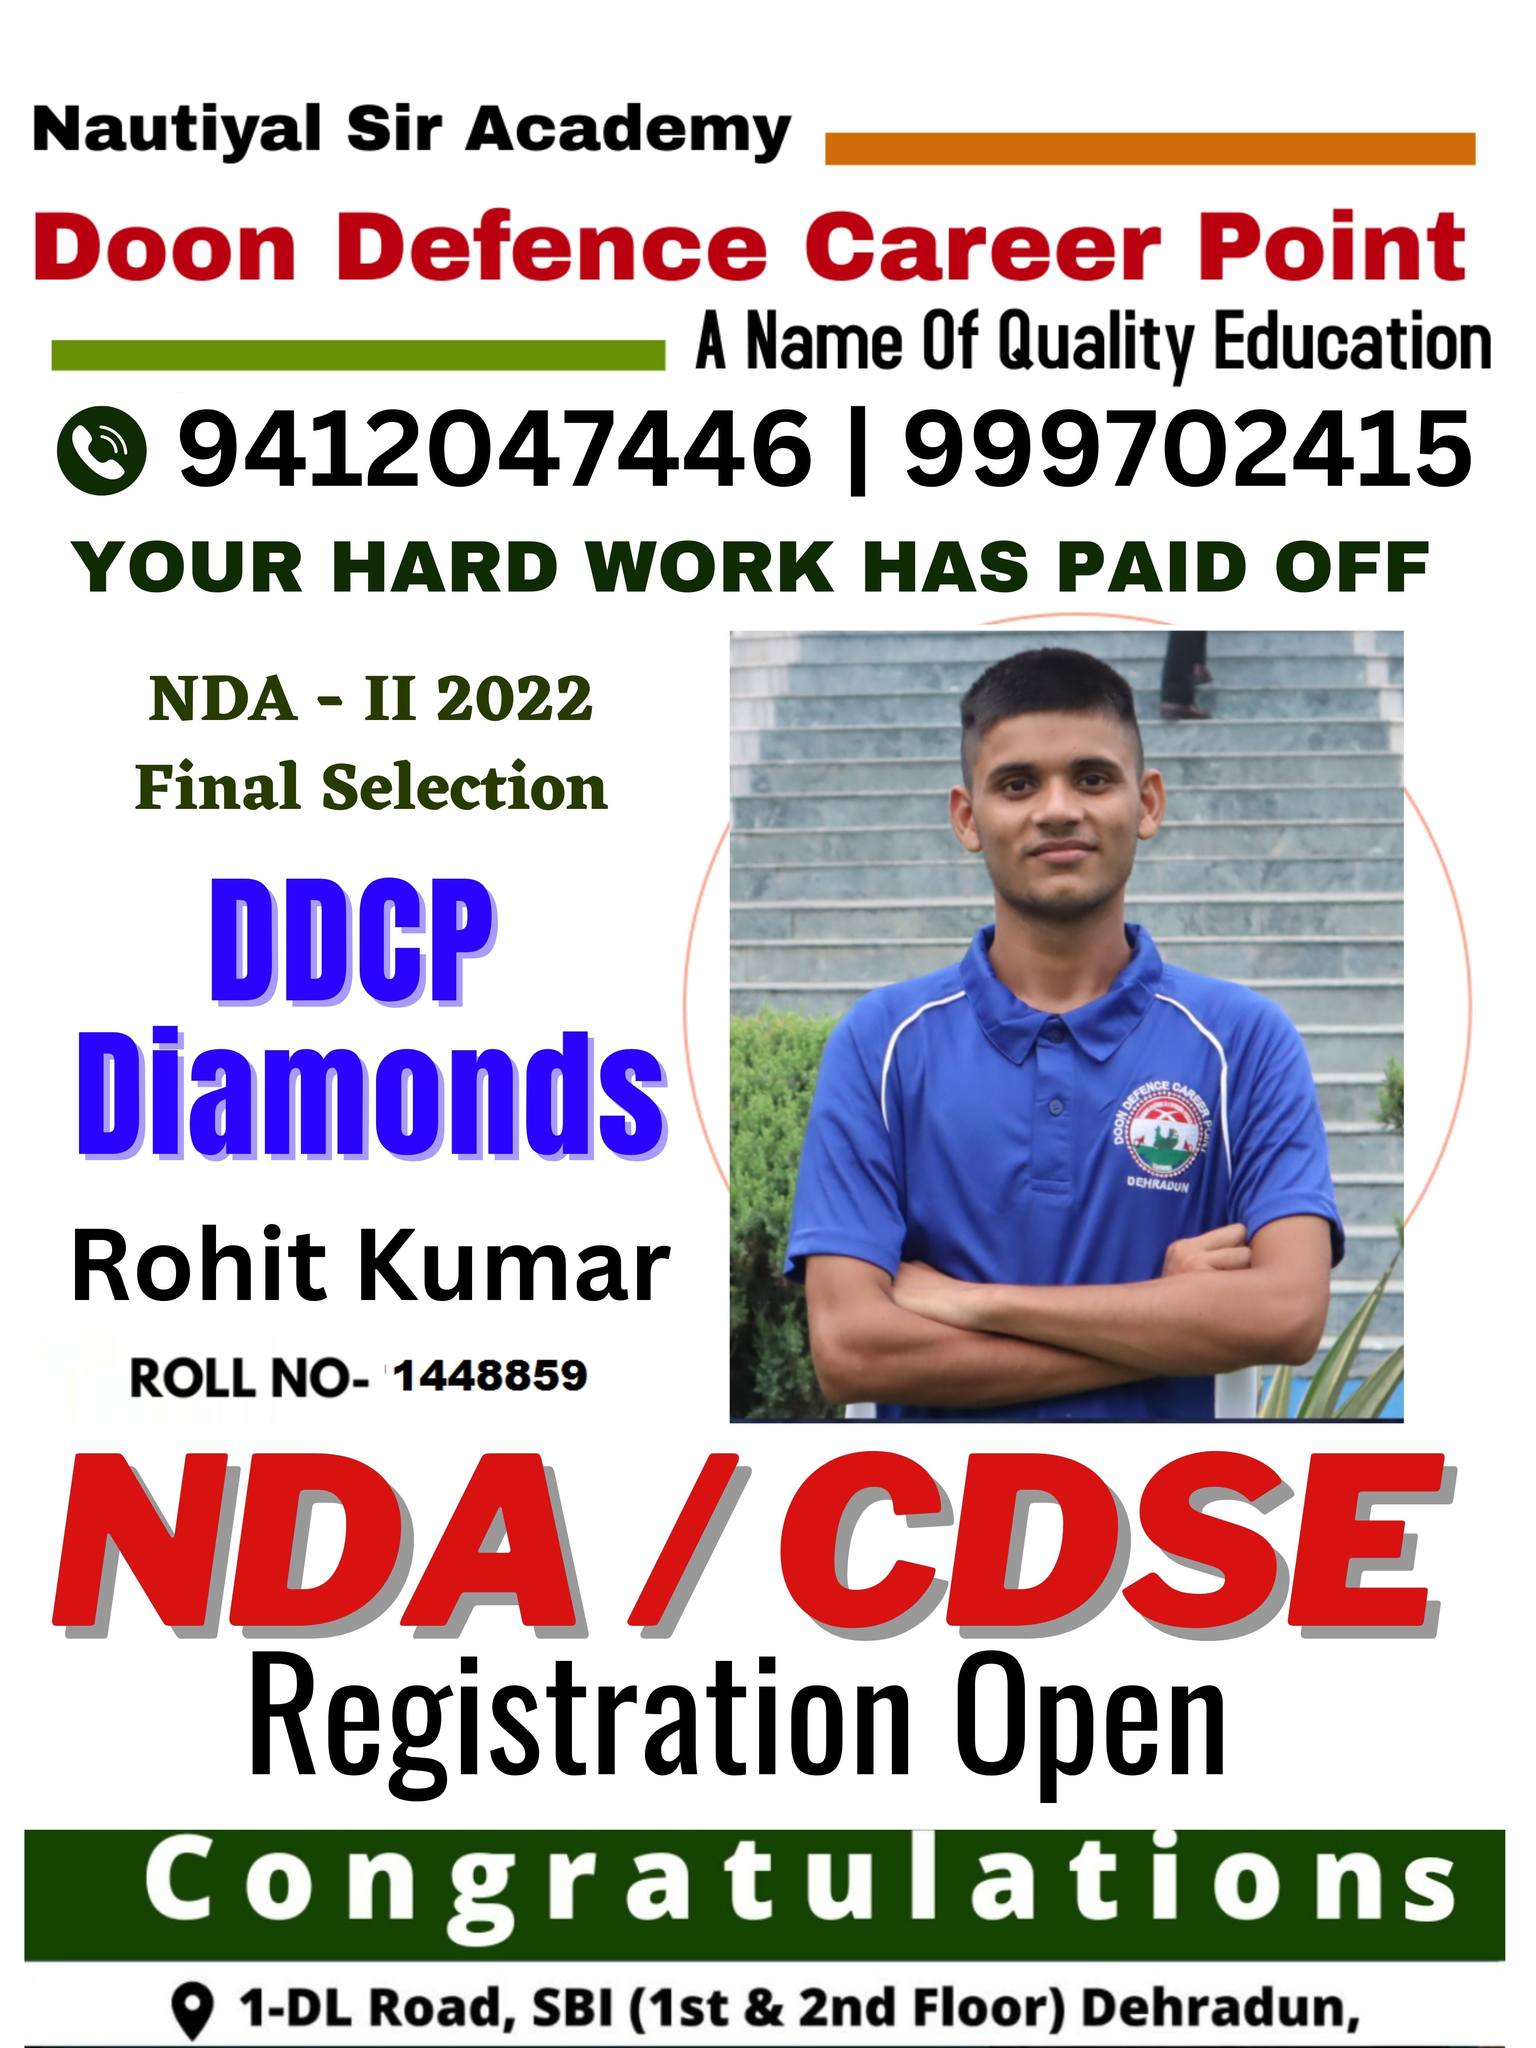 Doon Defence Career Point NDA Selected Student Amit